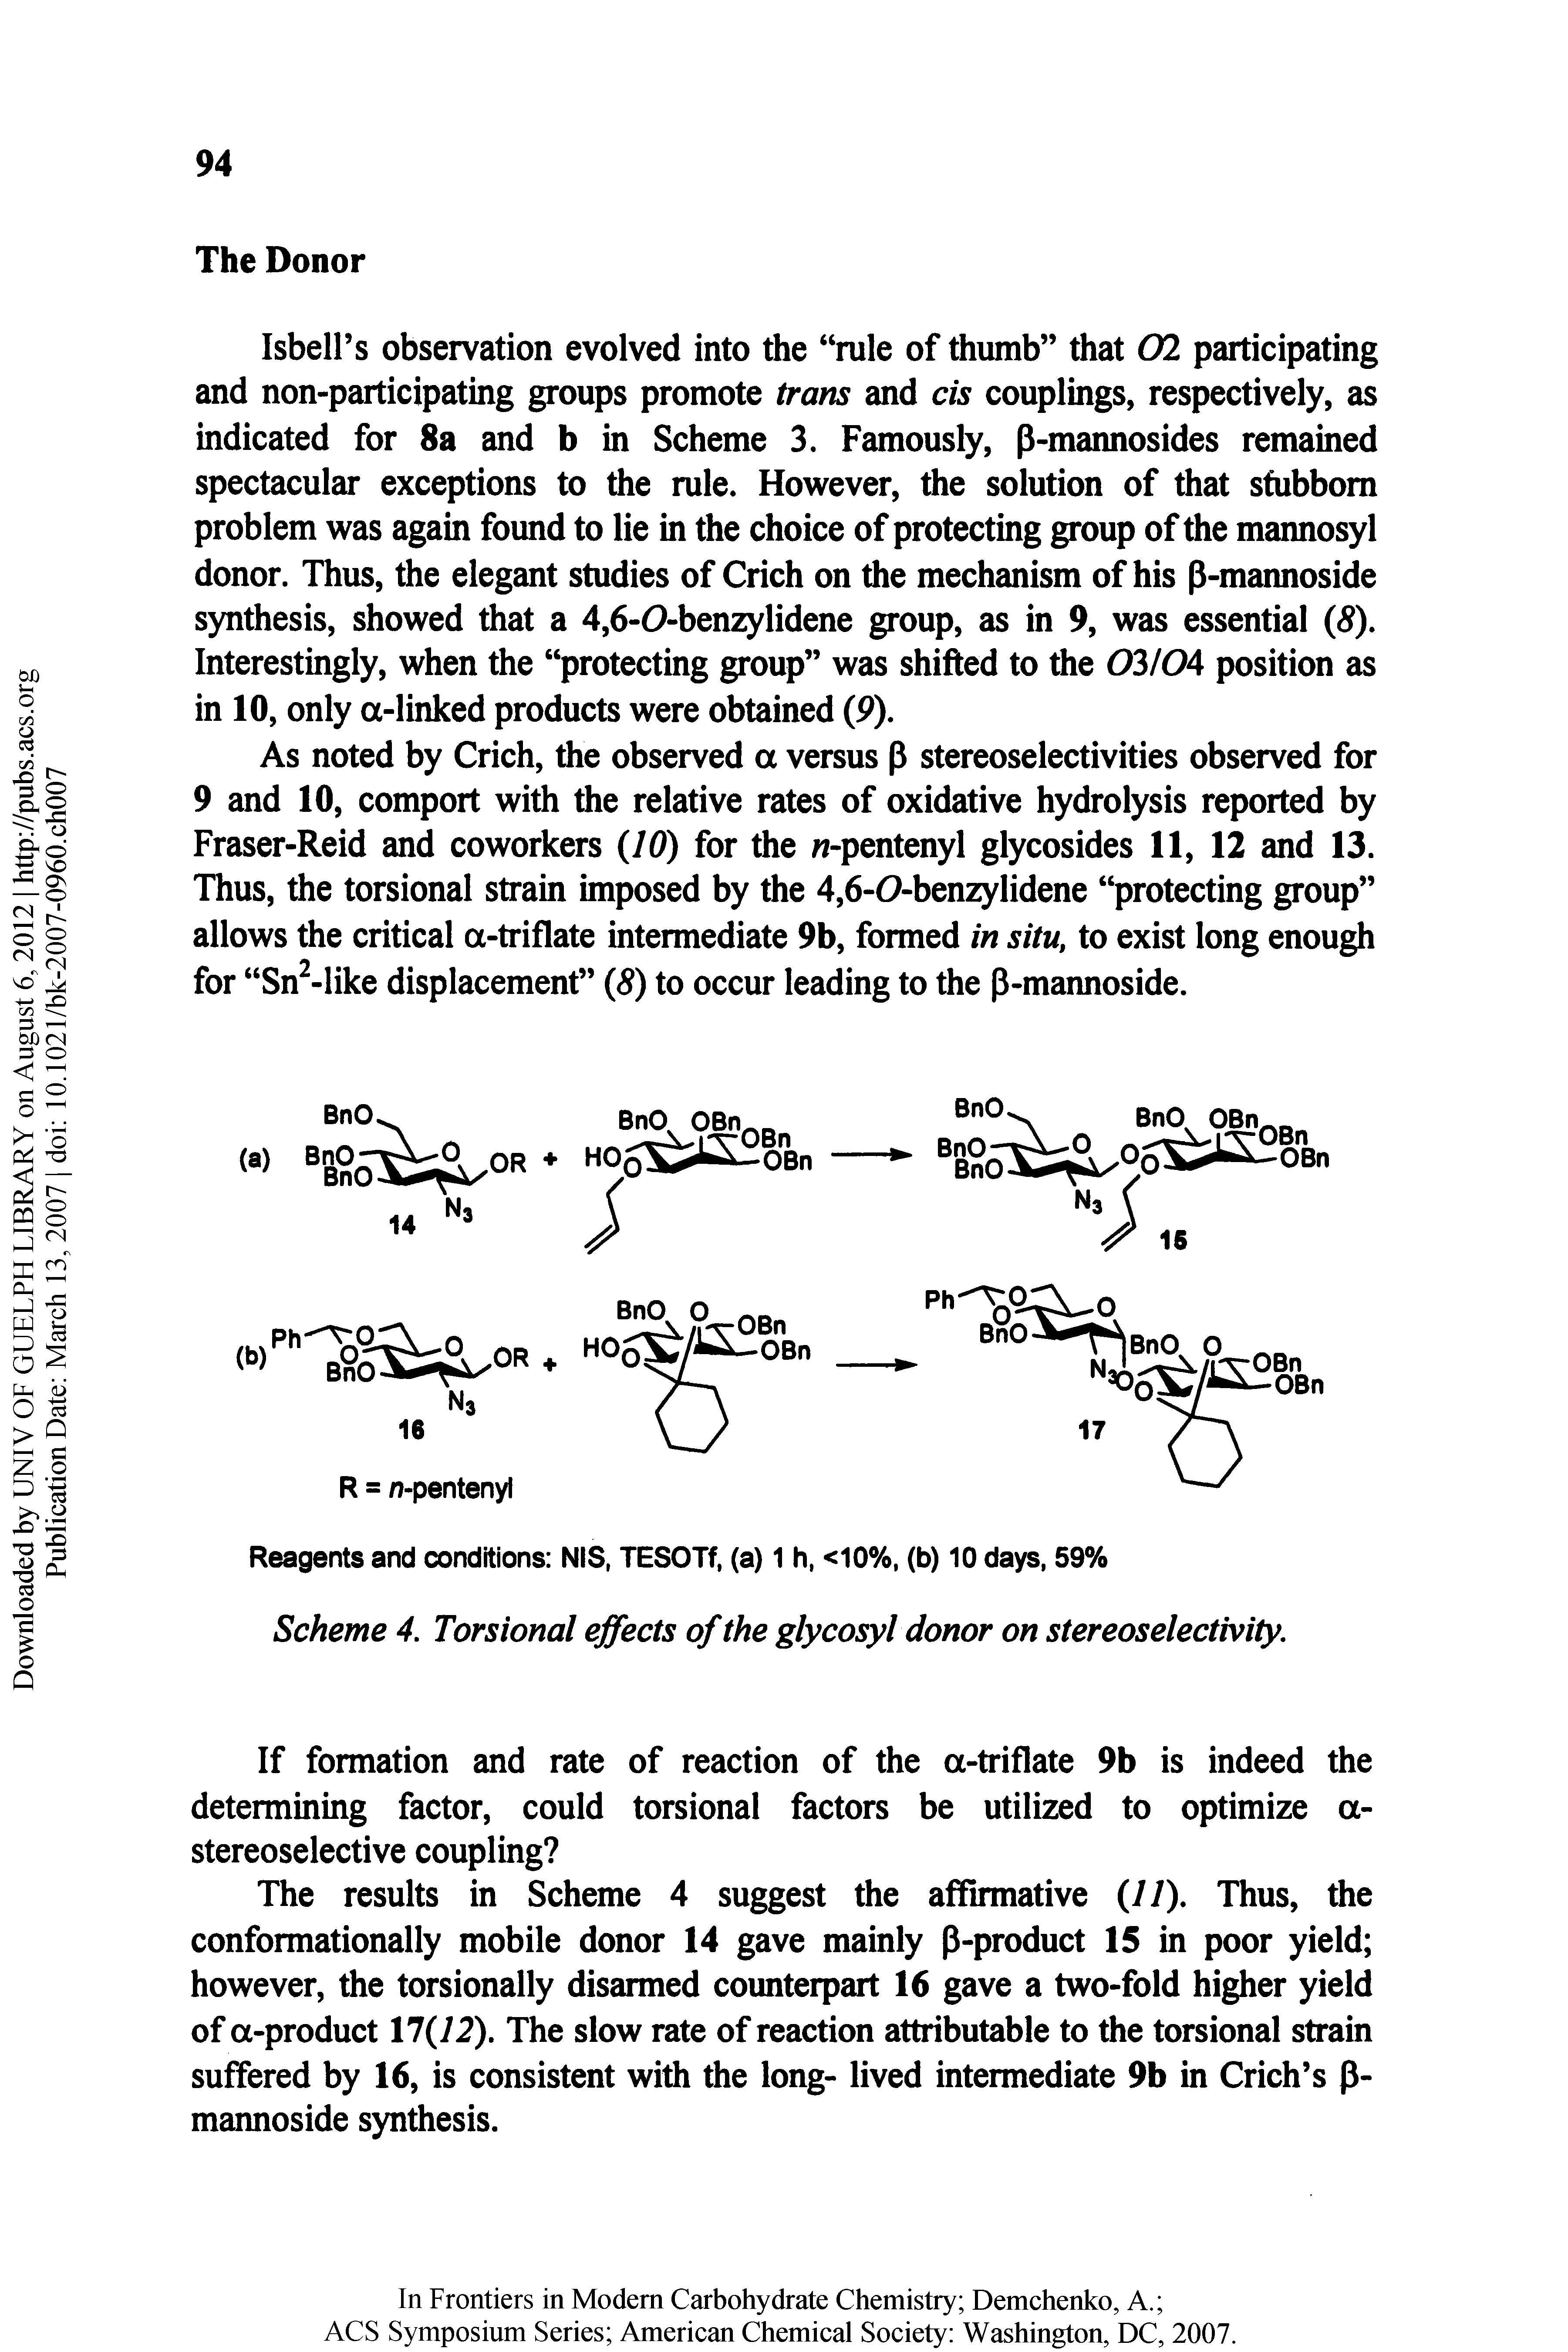 Scheme 4. Torsional effects of the glycosyl donor on stereoselectivity.